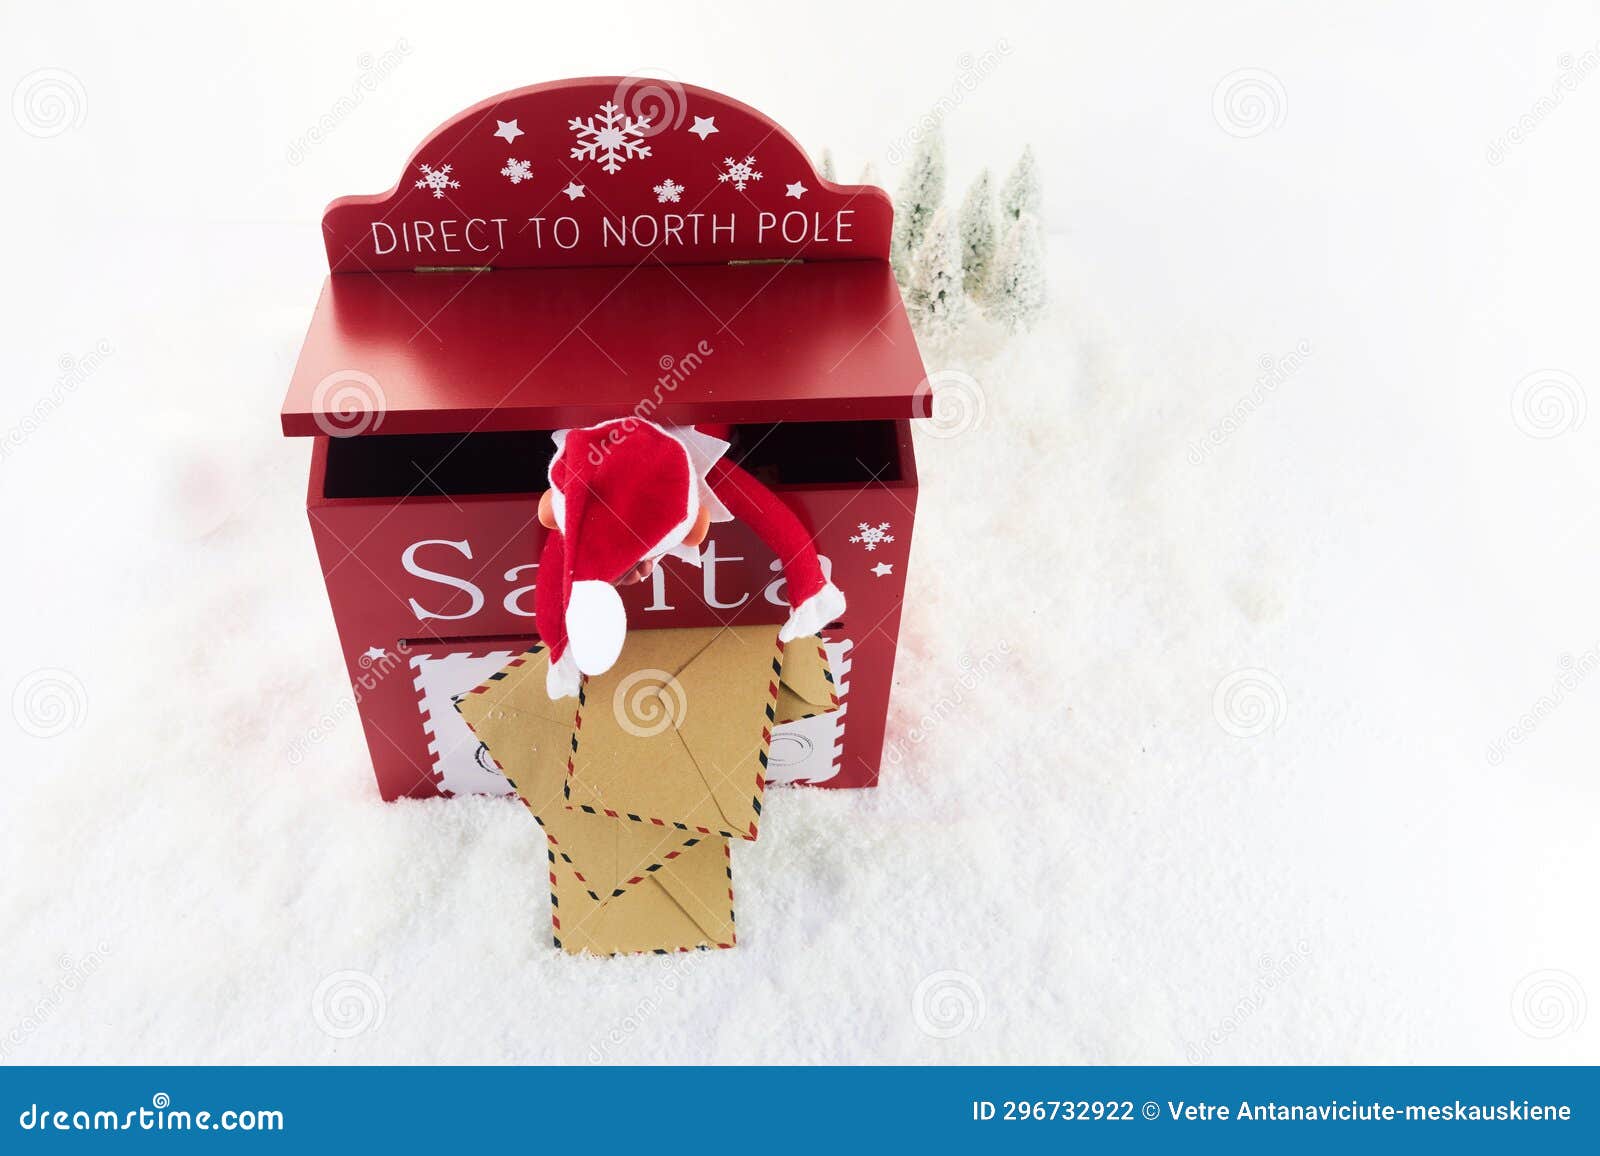 red mailbox for christmas mailings with letters to santa claus and elf.